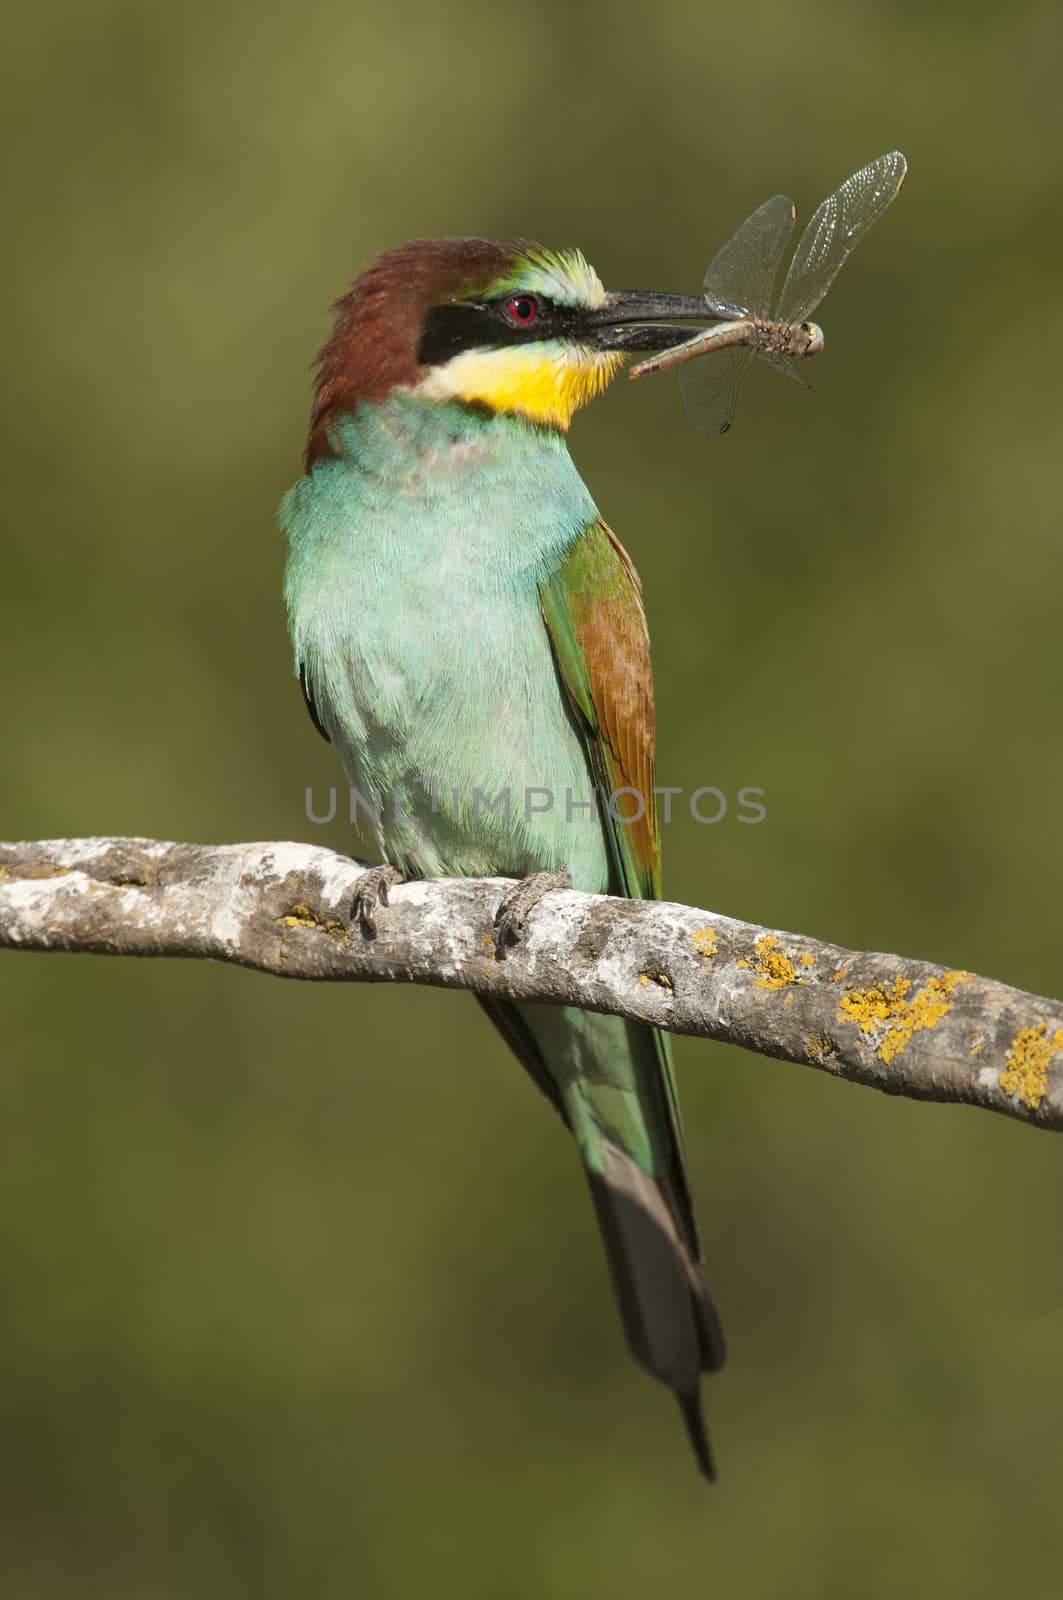 European bee-eater (Merops apiaster), perched on a branch with a by jalonsohu@gmail.com